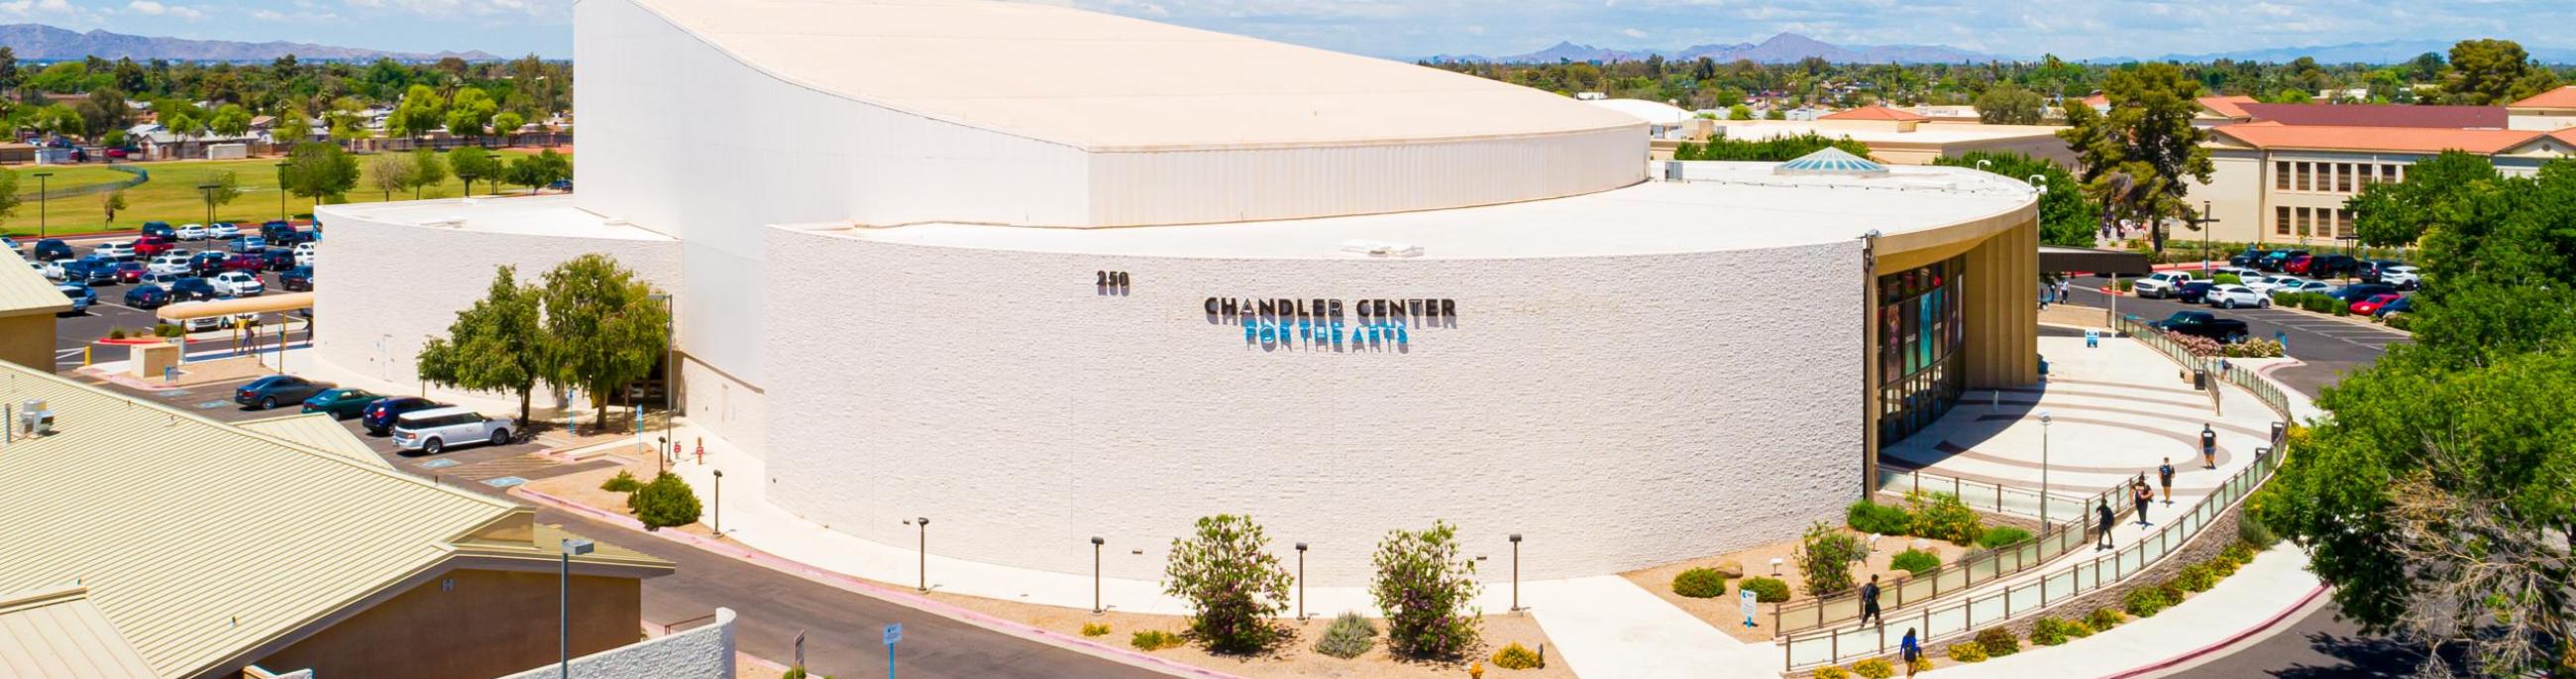 An aerial view of the performing arts center from the south with blue skies in the background